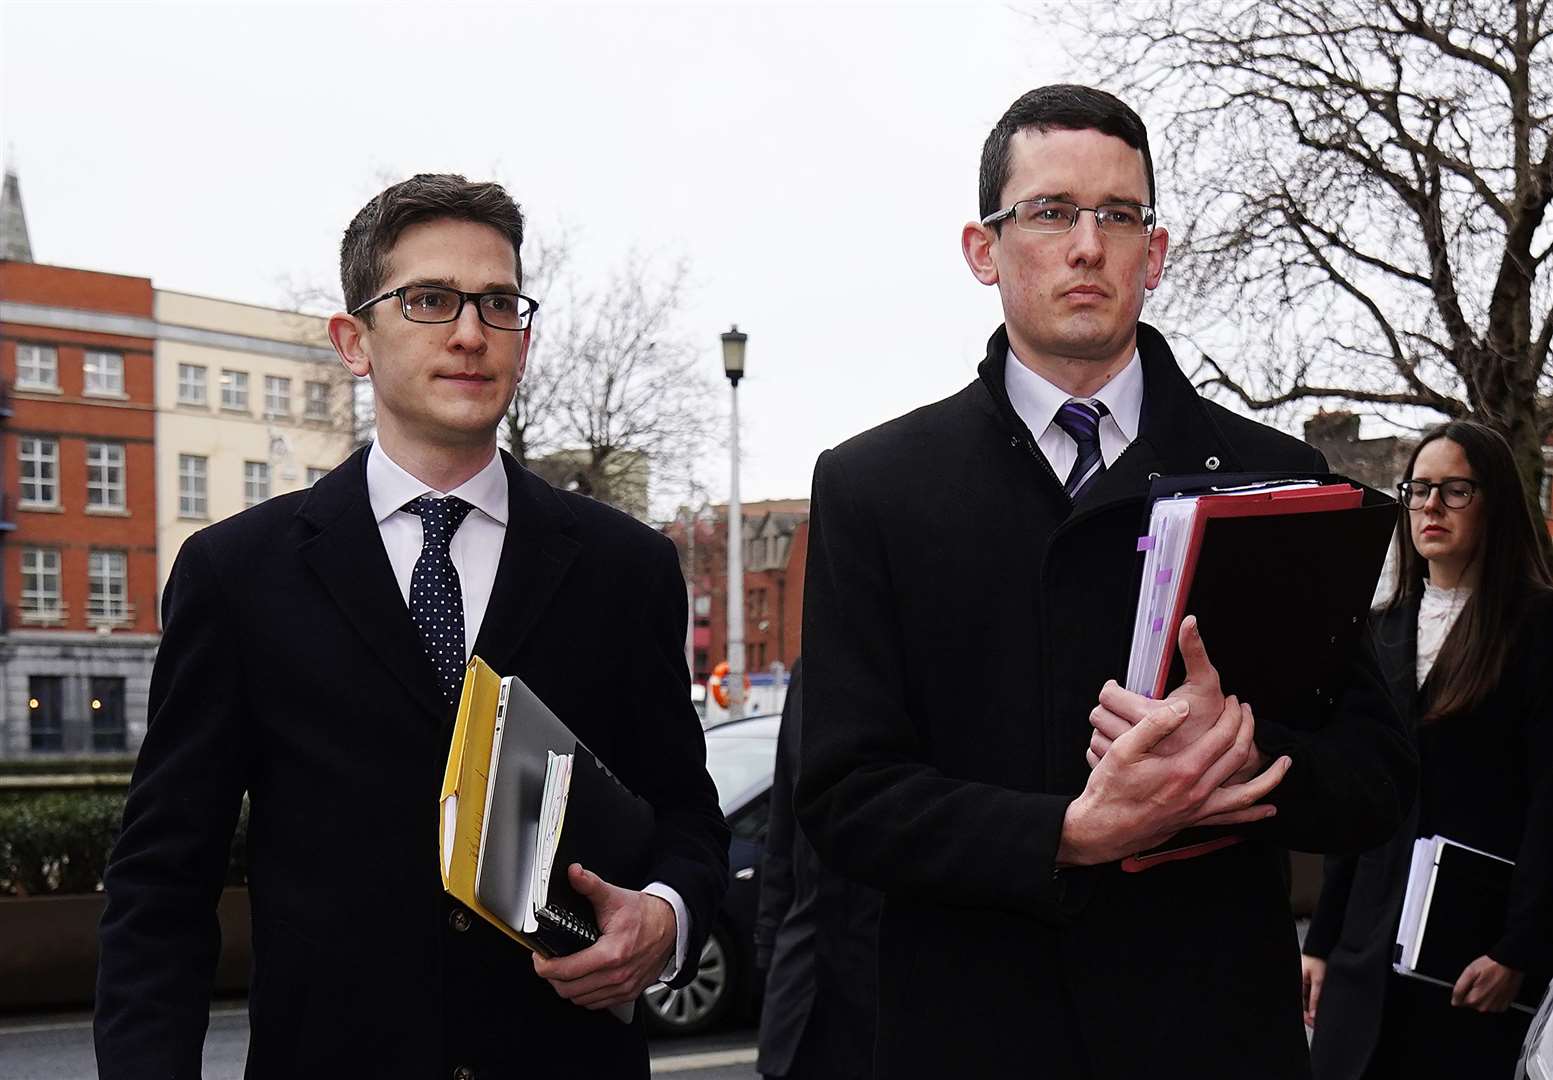 Enoch Burke (right) accompanied by his brother Isaac arriving at the Court of Appeal in Dublin (Brian Lawless/PA)